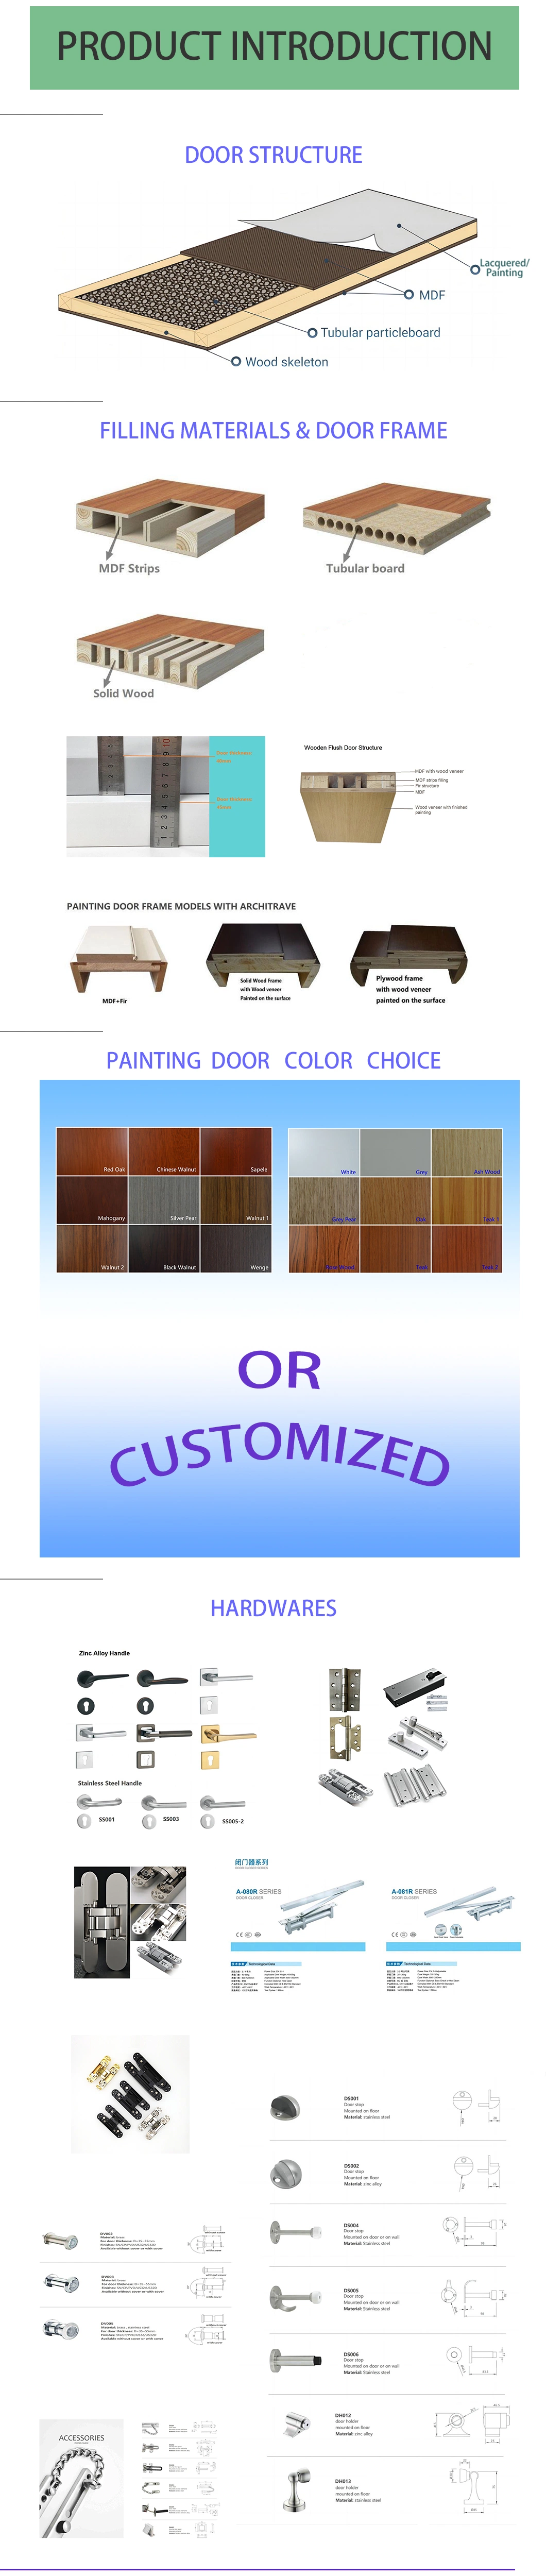 High Quality MDF Wooden White Color Composite Painting Wood Wooden Interior Doors